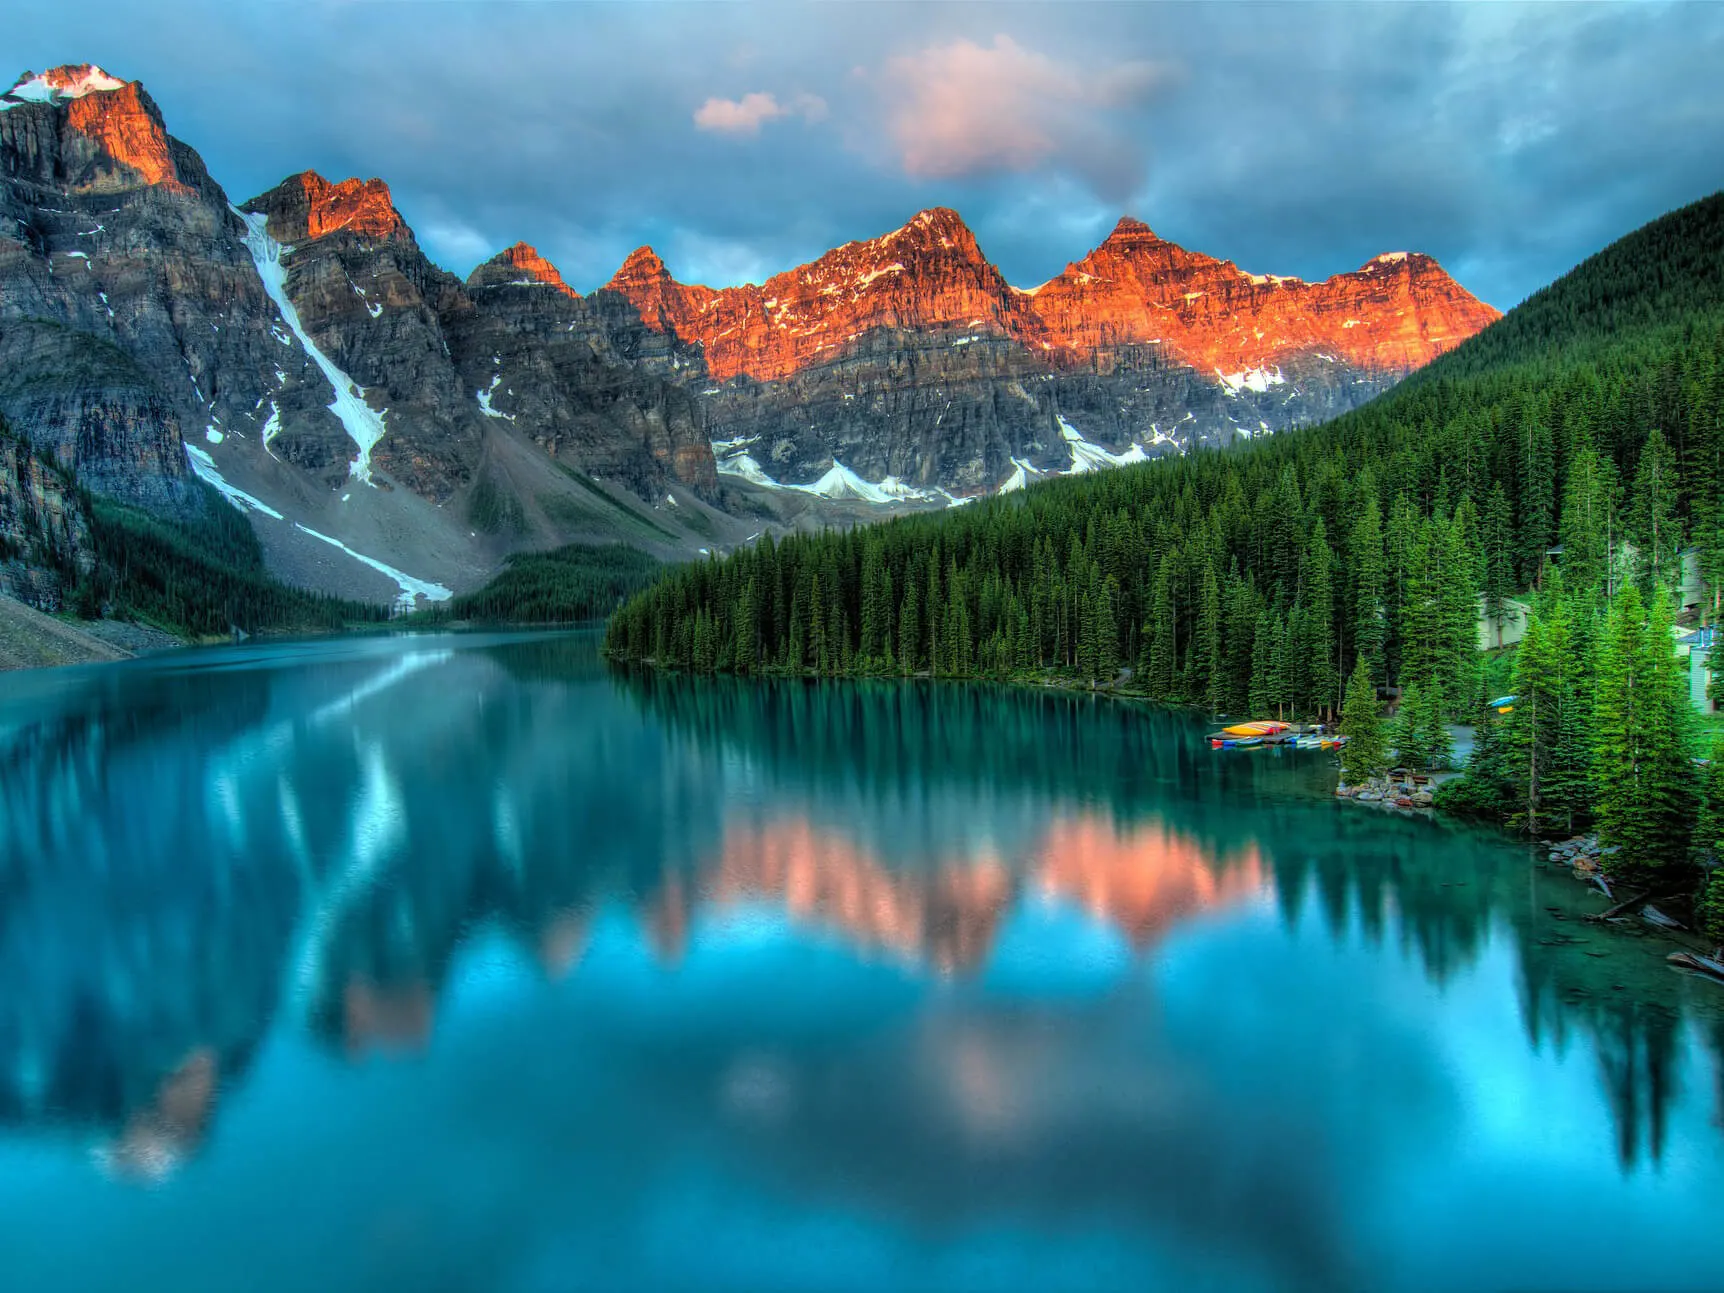 Inspiration Bungalow liter 10 Most Incredible Natural Attractions in Canada - Taylor's Tracks